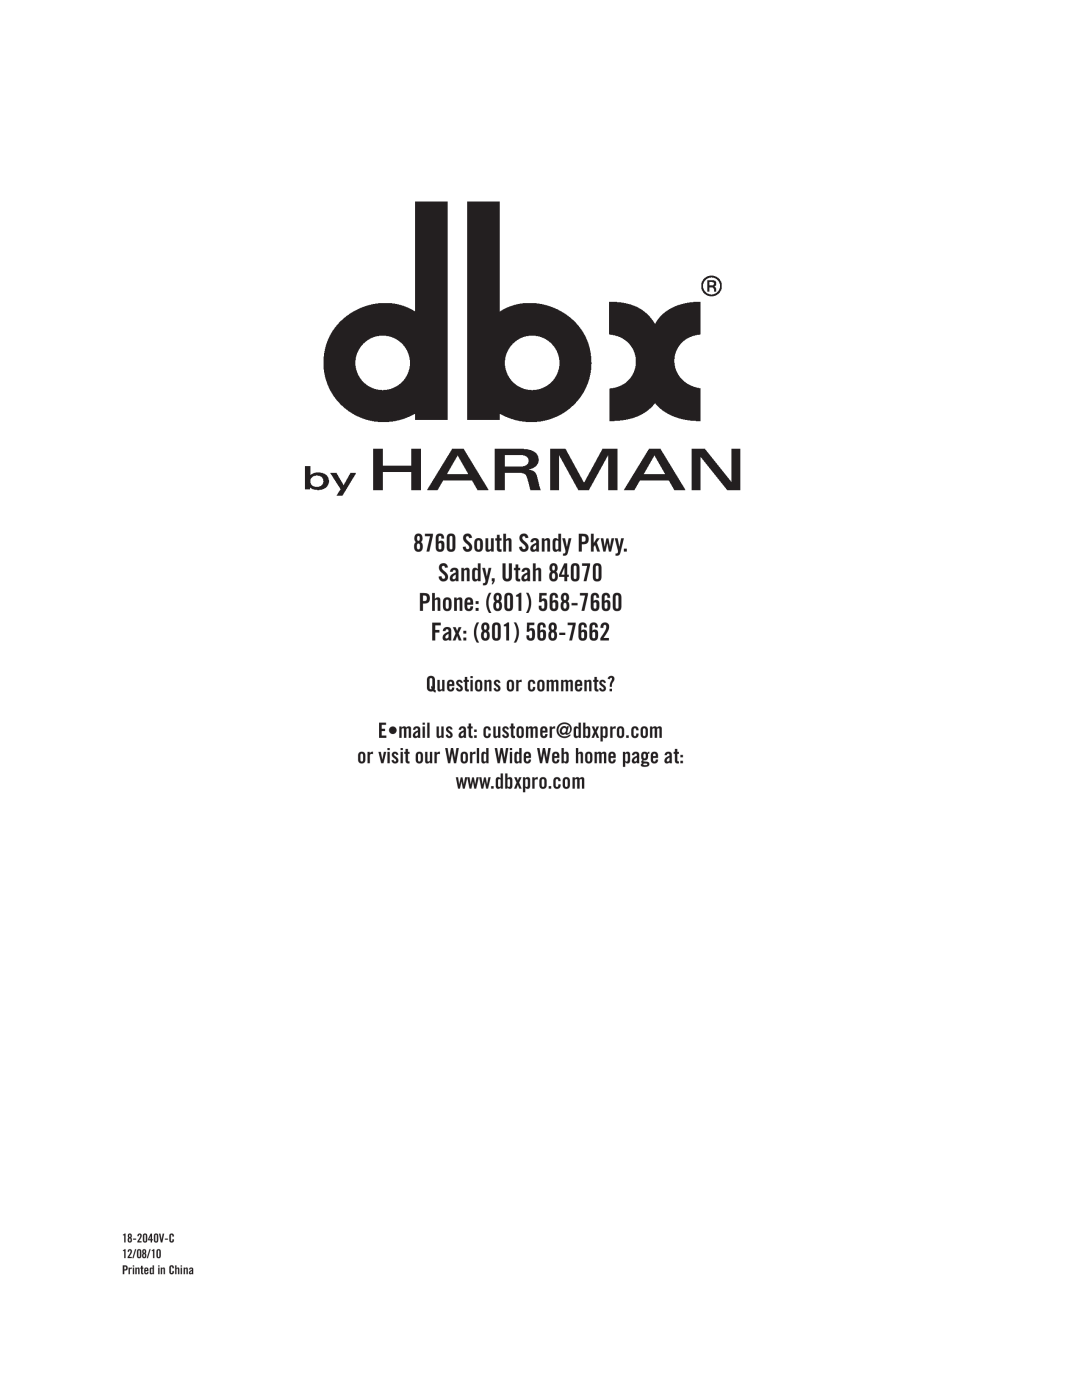 Harman 160A manual South Sandy Pkwy Sandy, Utah Phone 801 Fax 801, Questions or comments? Email us at customer@dbxpro.com 